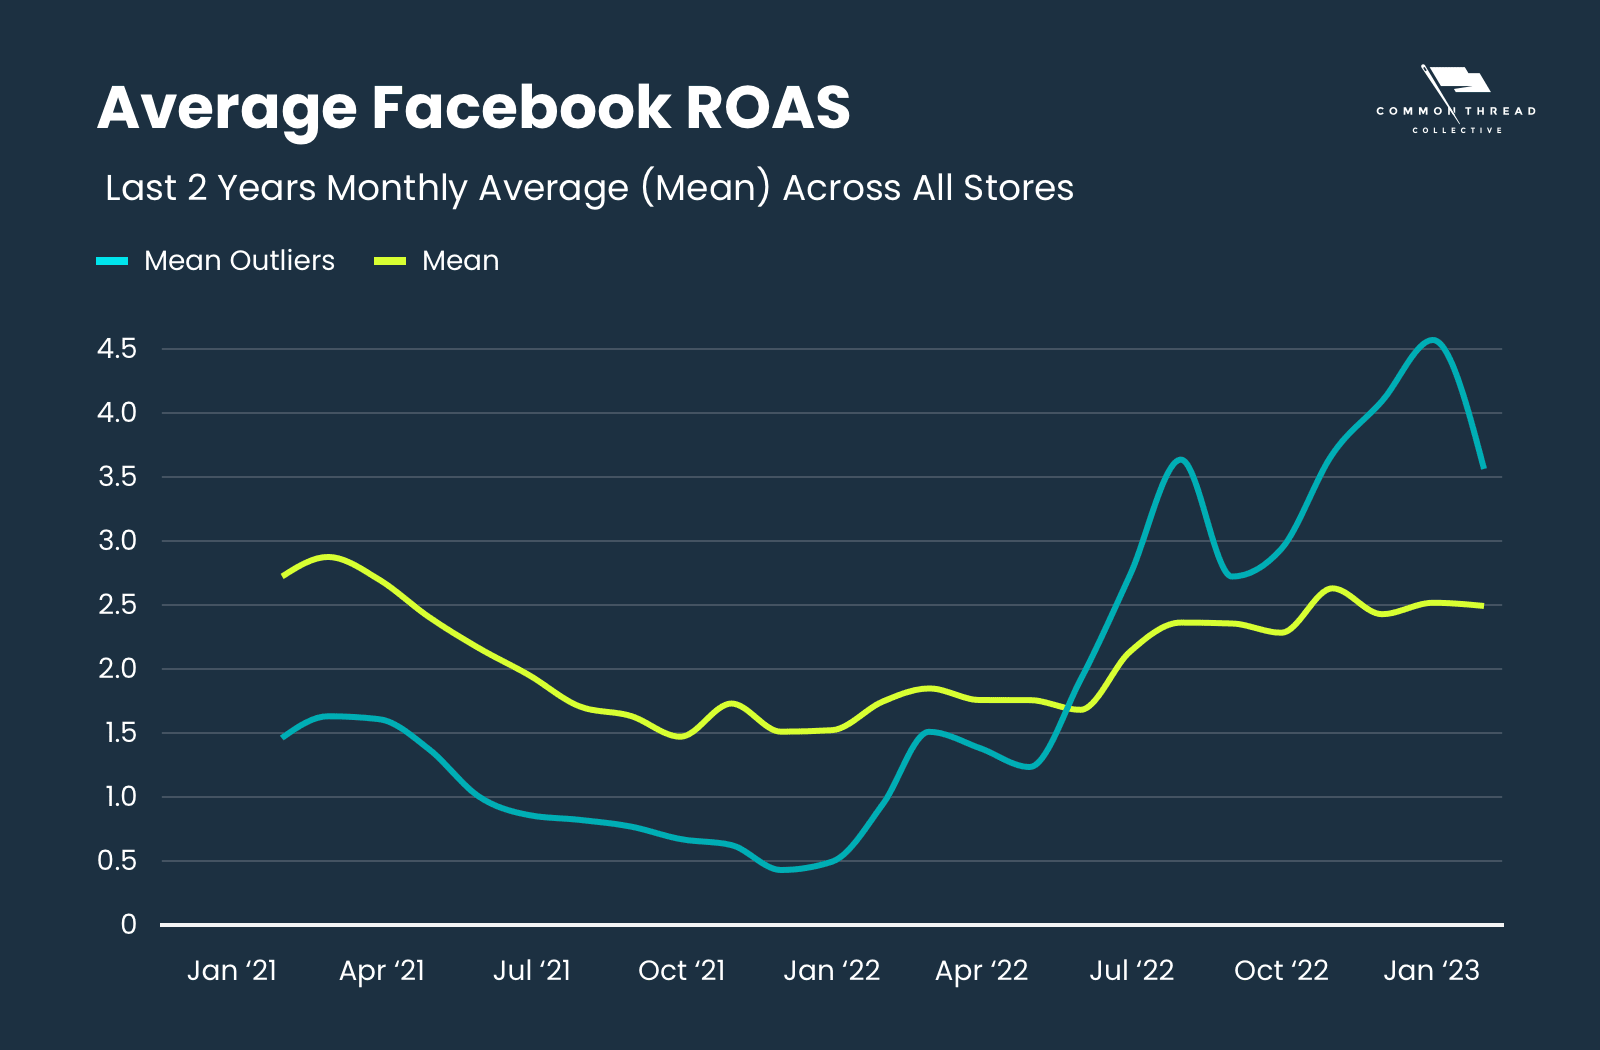 Average (Mean) Facebook ROAS last 2 years across all stores